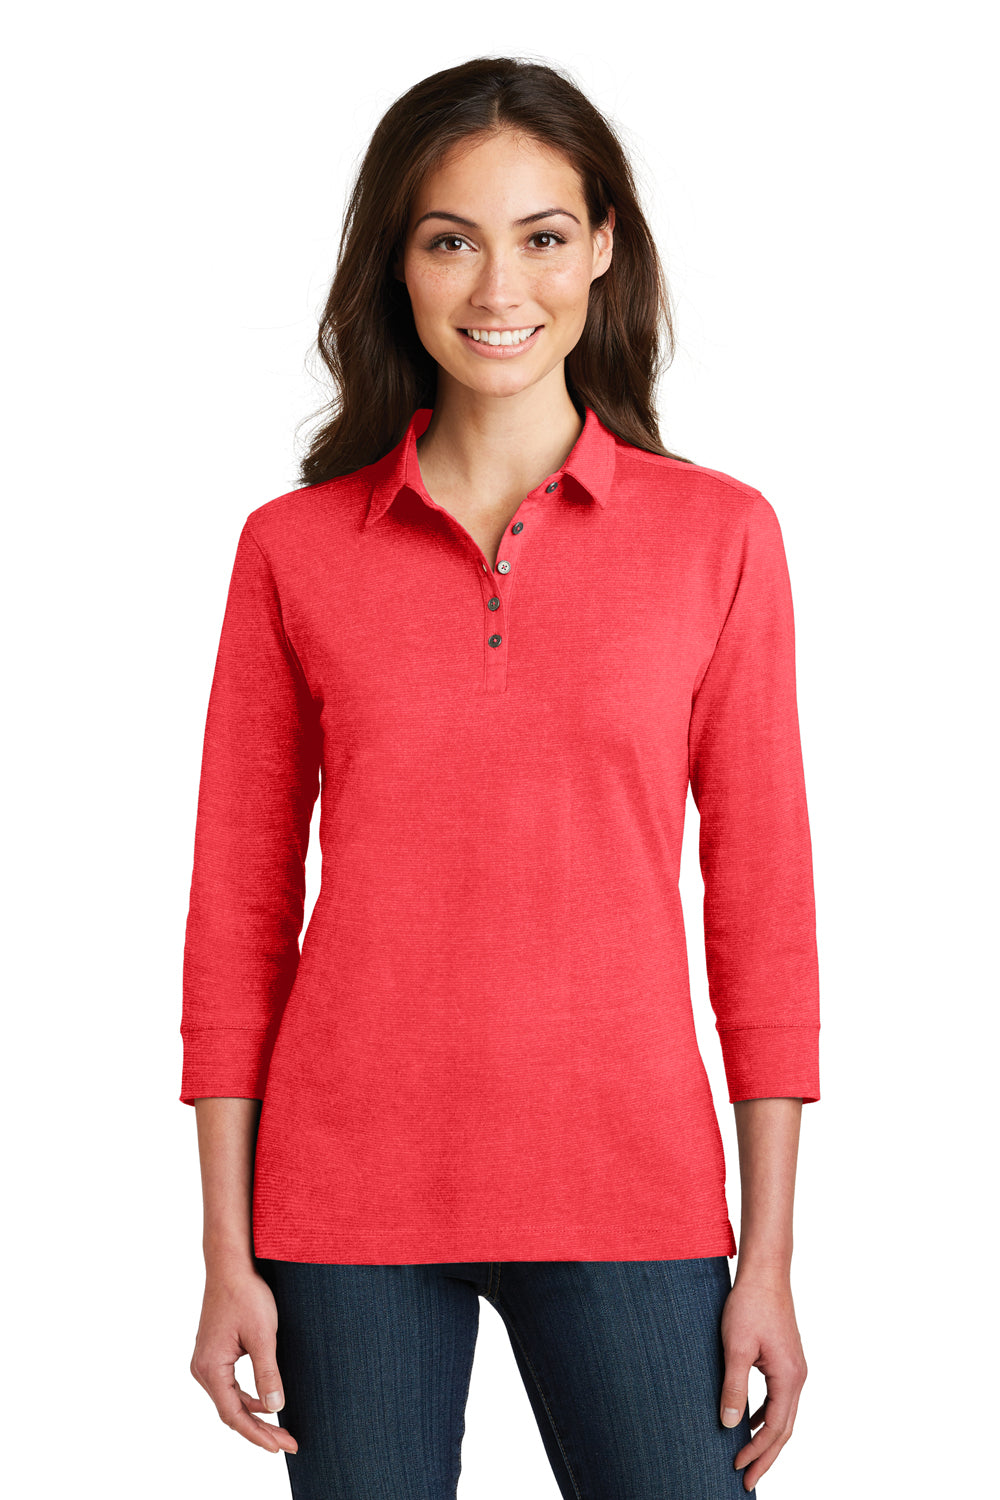 Port Authority L578 Womens Meridian 3/4 Sleeve Polo Shirt Hibiscus Pink Front